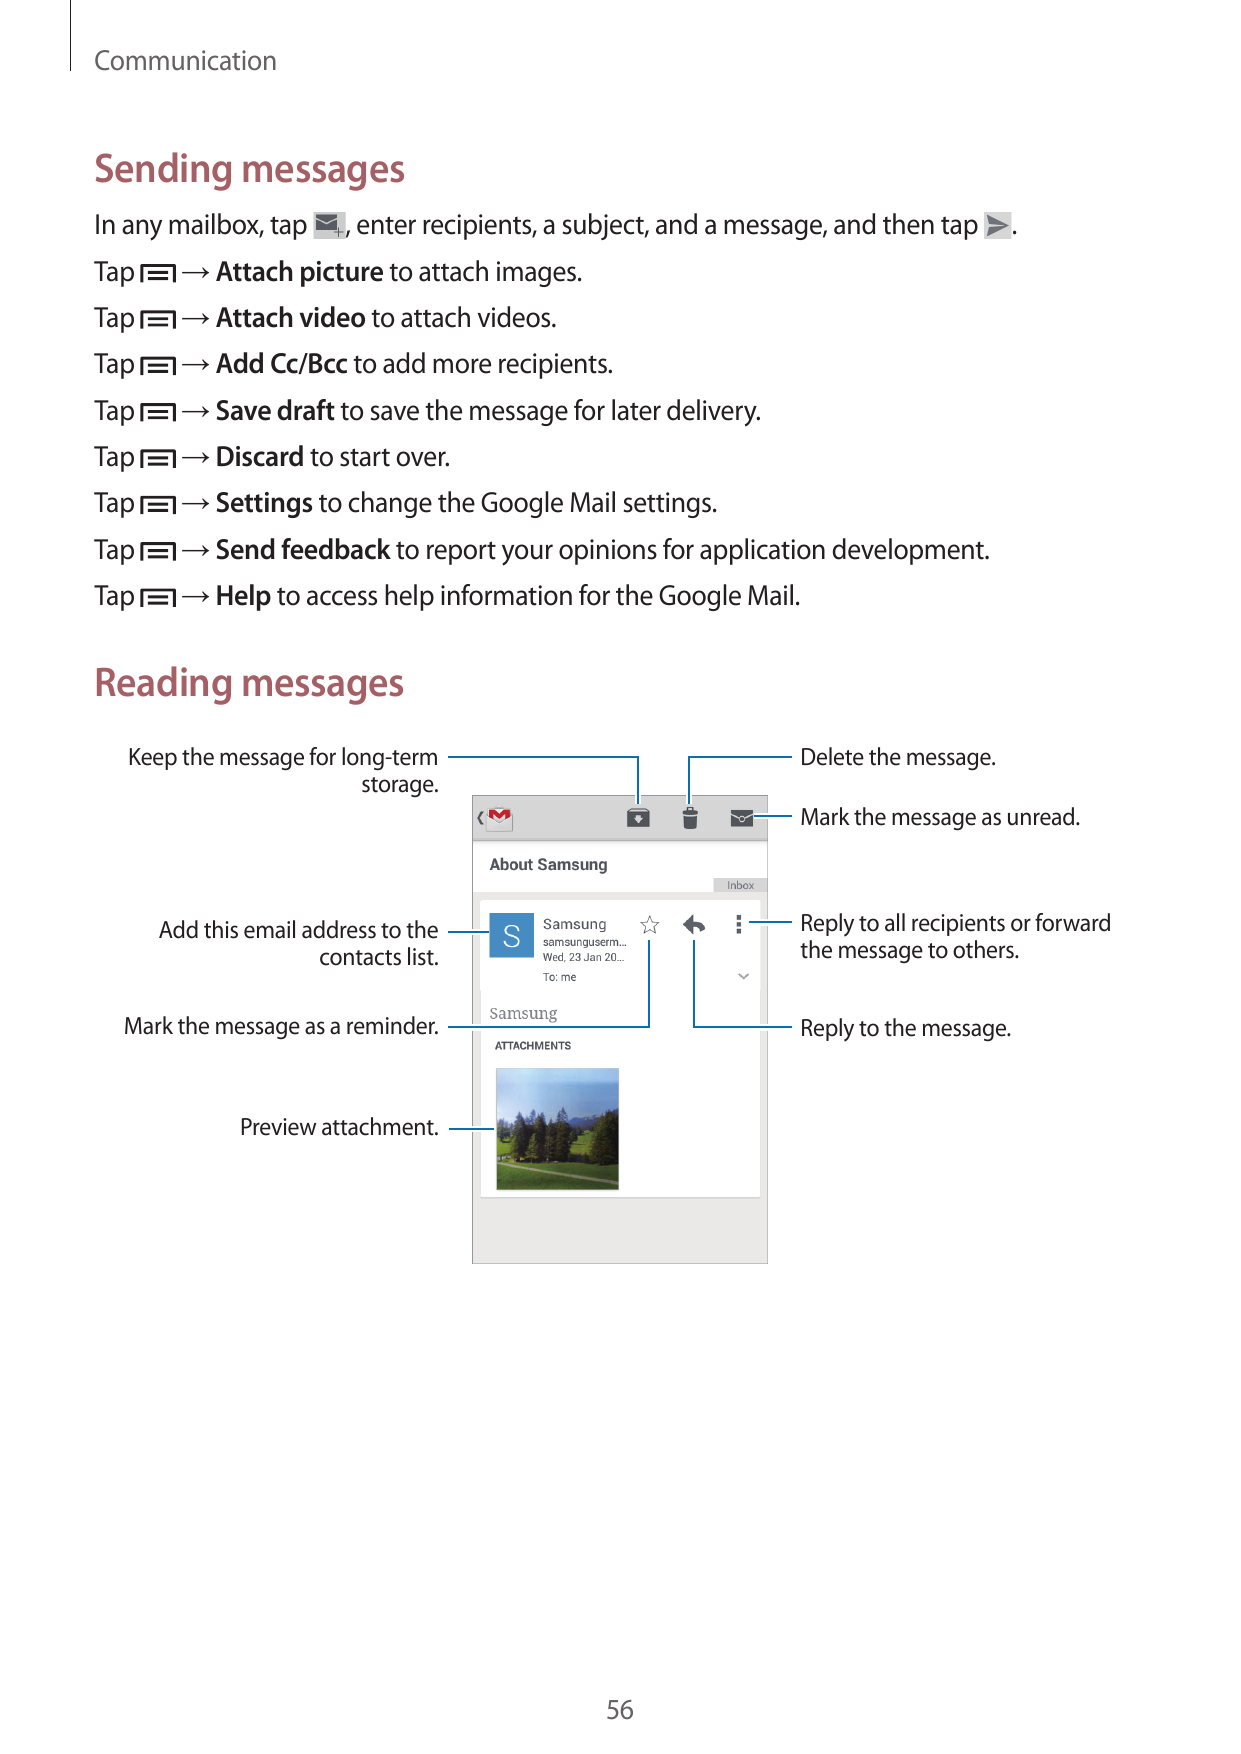 CommunicationSending messagesIn any mailbox, tap, enter recipients, a subject, and a message, and then tapTap→ Attach picture to